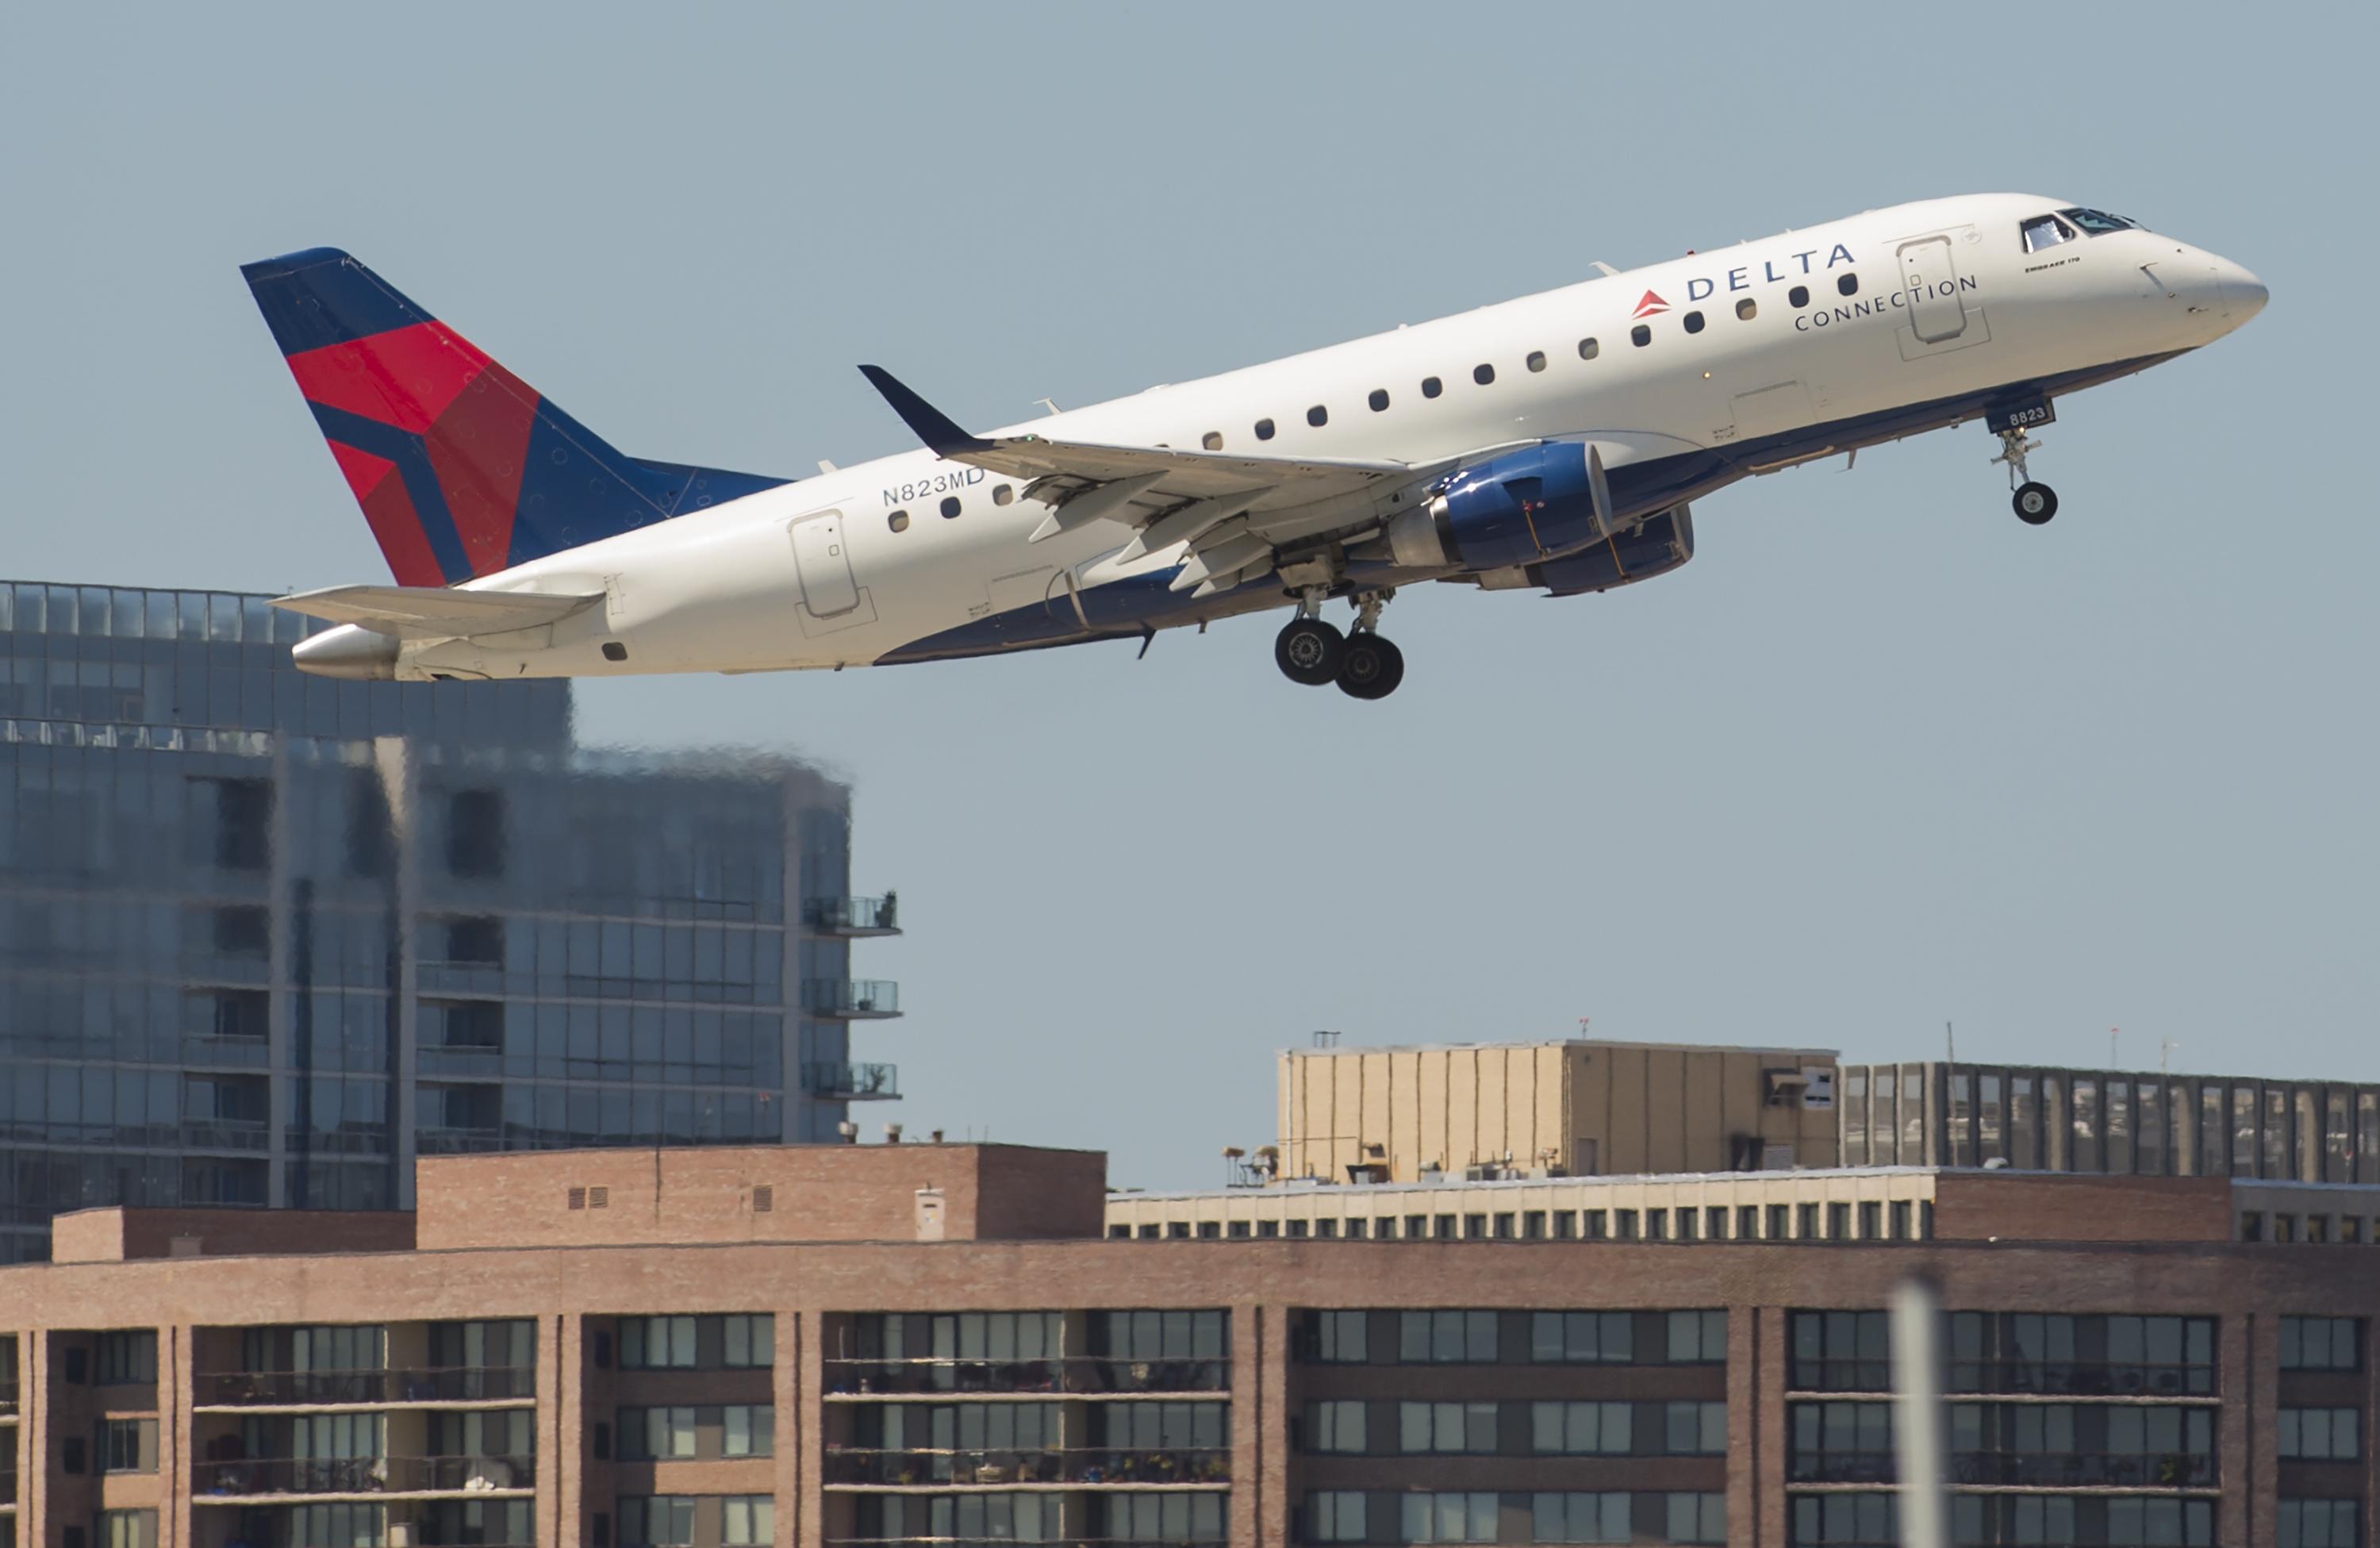 Delta to bring back free meals on some US flights - CBS News